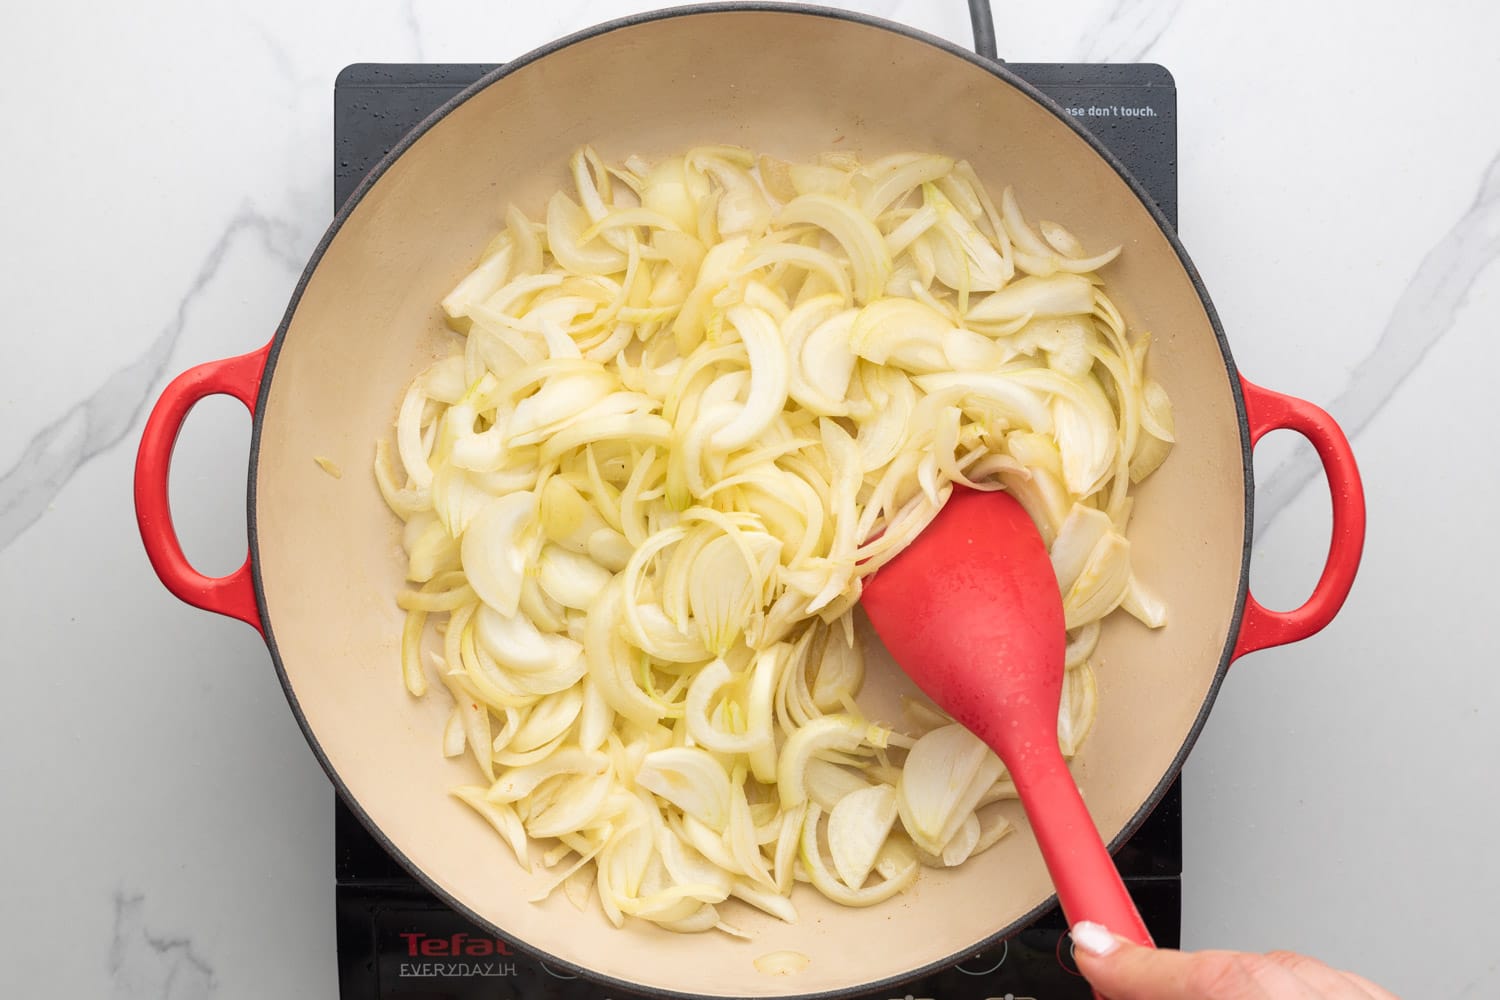 thinly sliced onions sauteed in a large skillet over an electric burner, stirred with a red spatula.